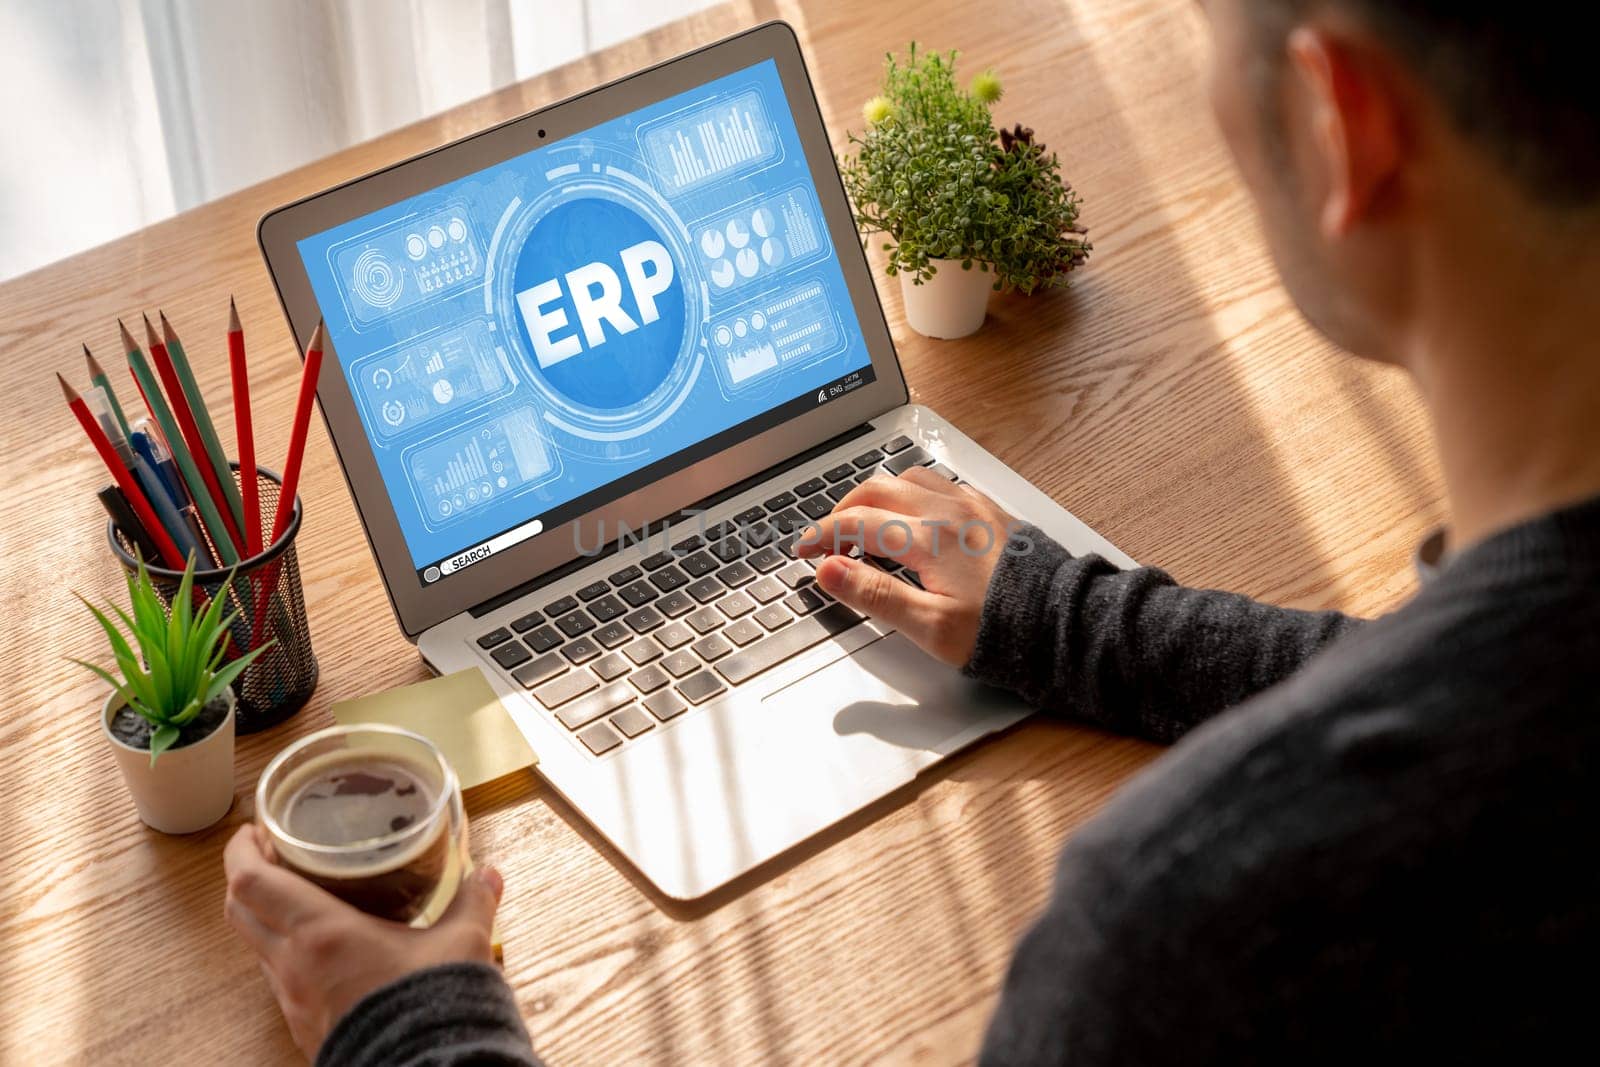 ERP enterprise resource planning software for modish business by biancoblue